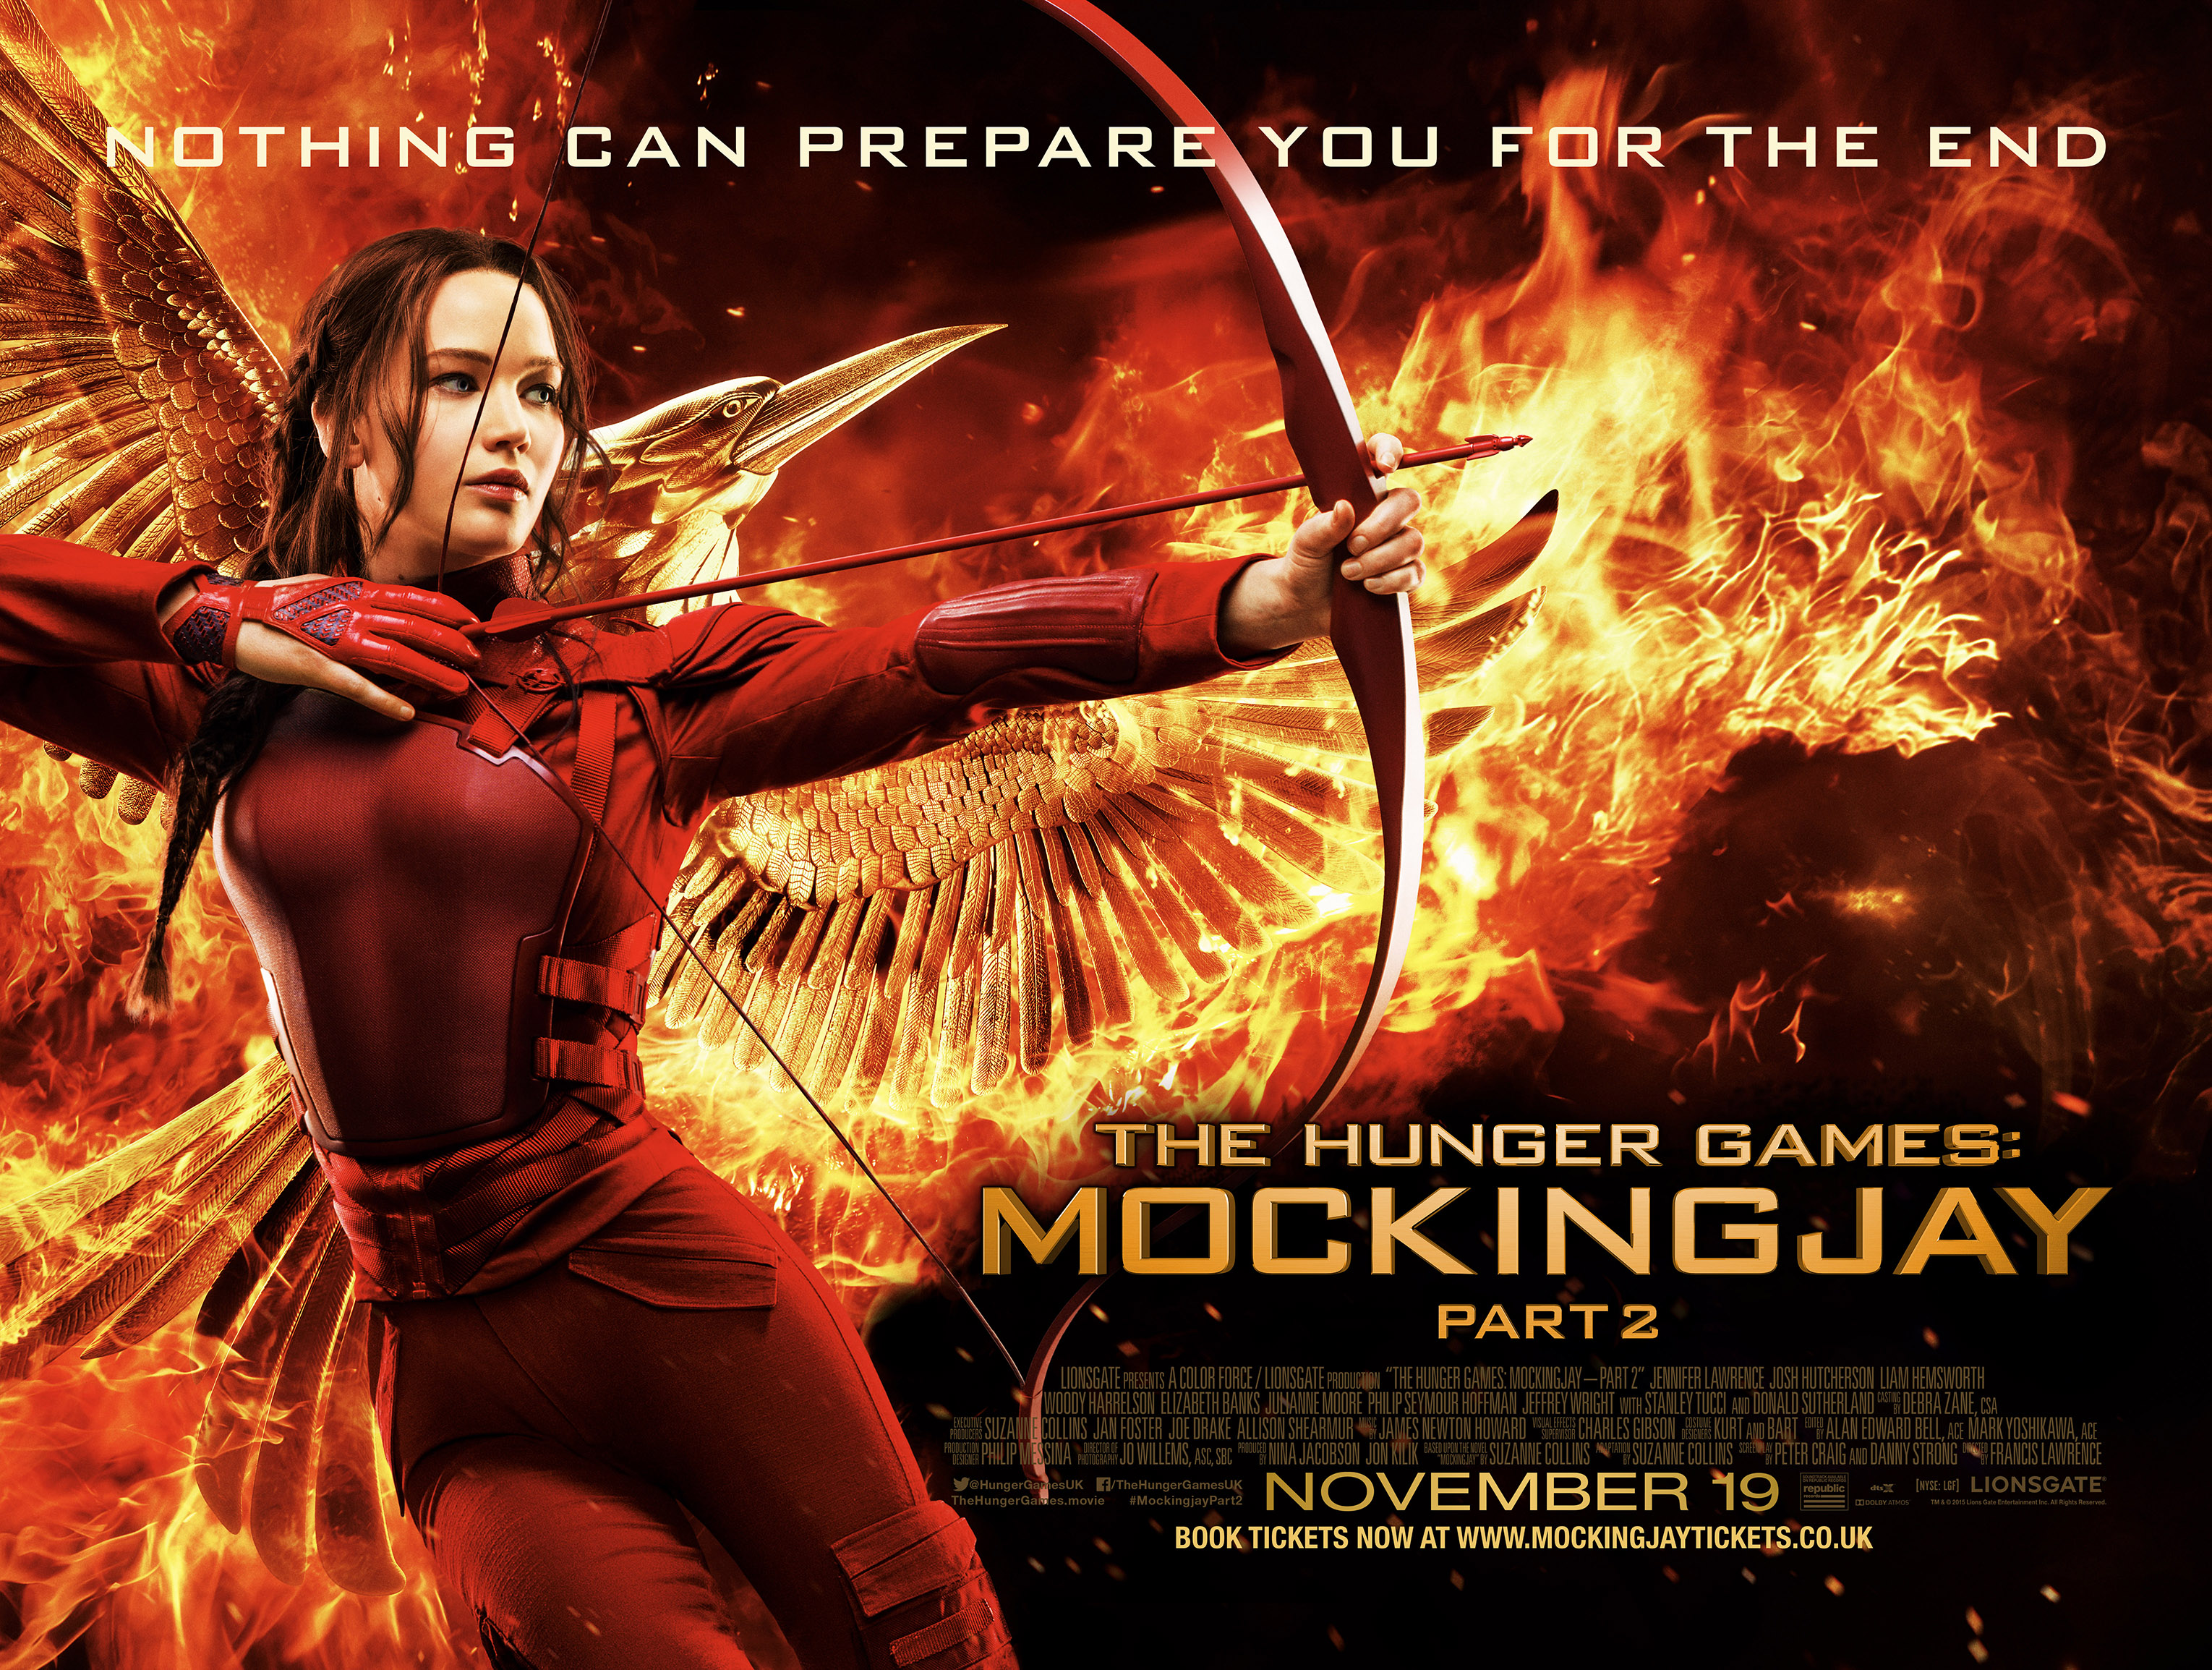 download-free-where-can-i-see-the-hunger-games-for-free-llcbackup